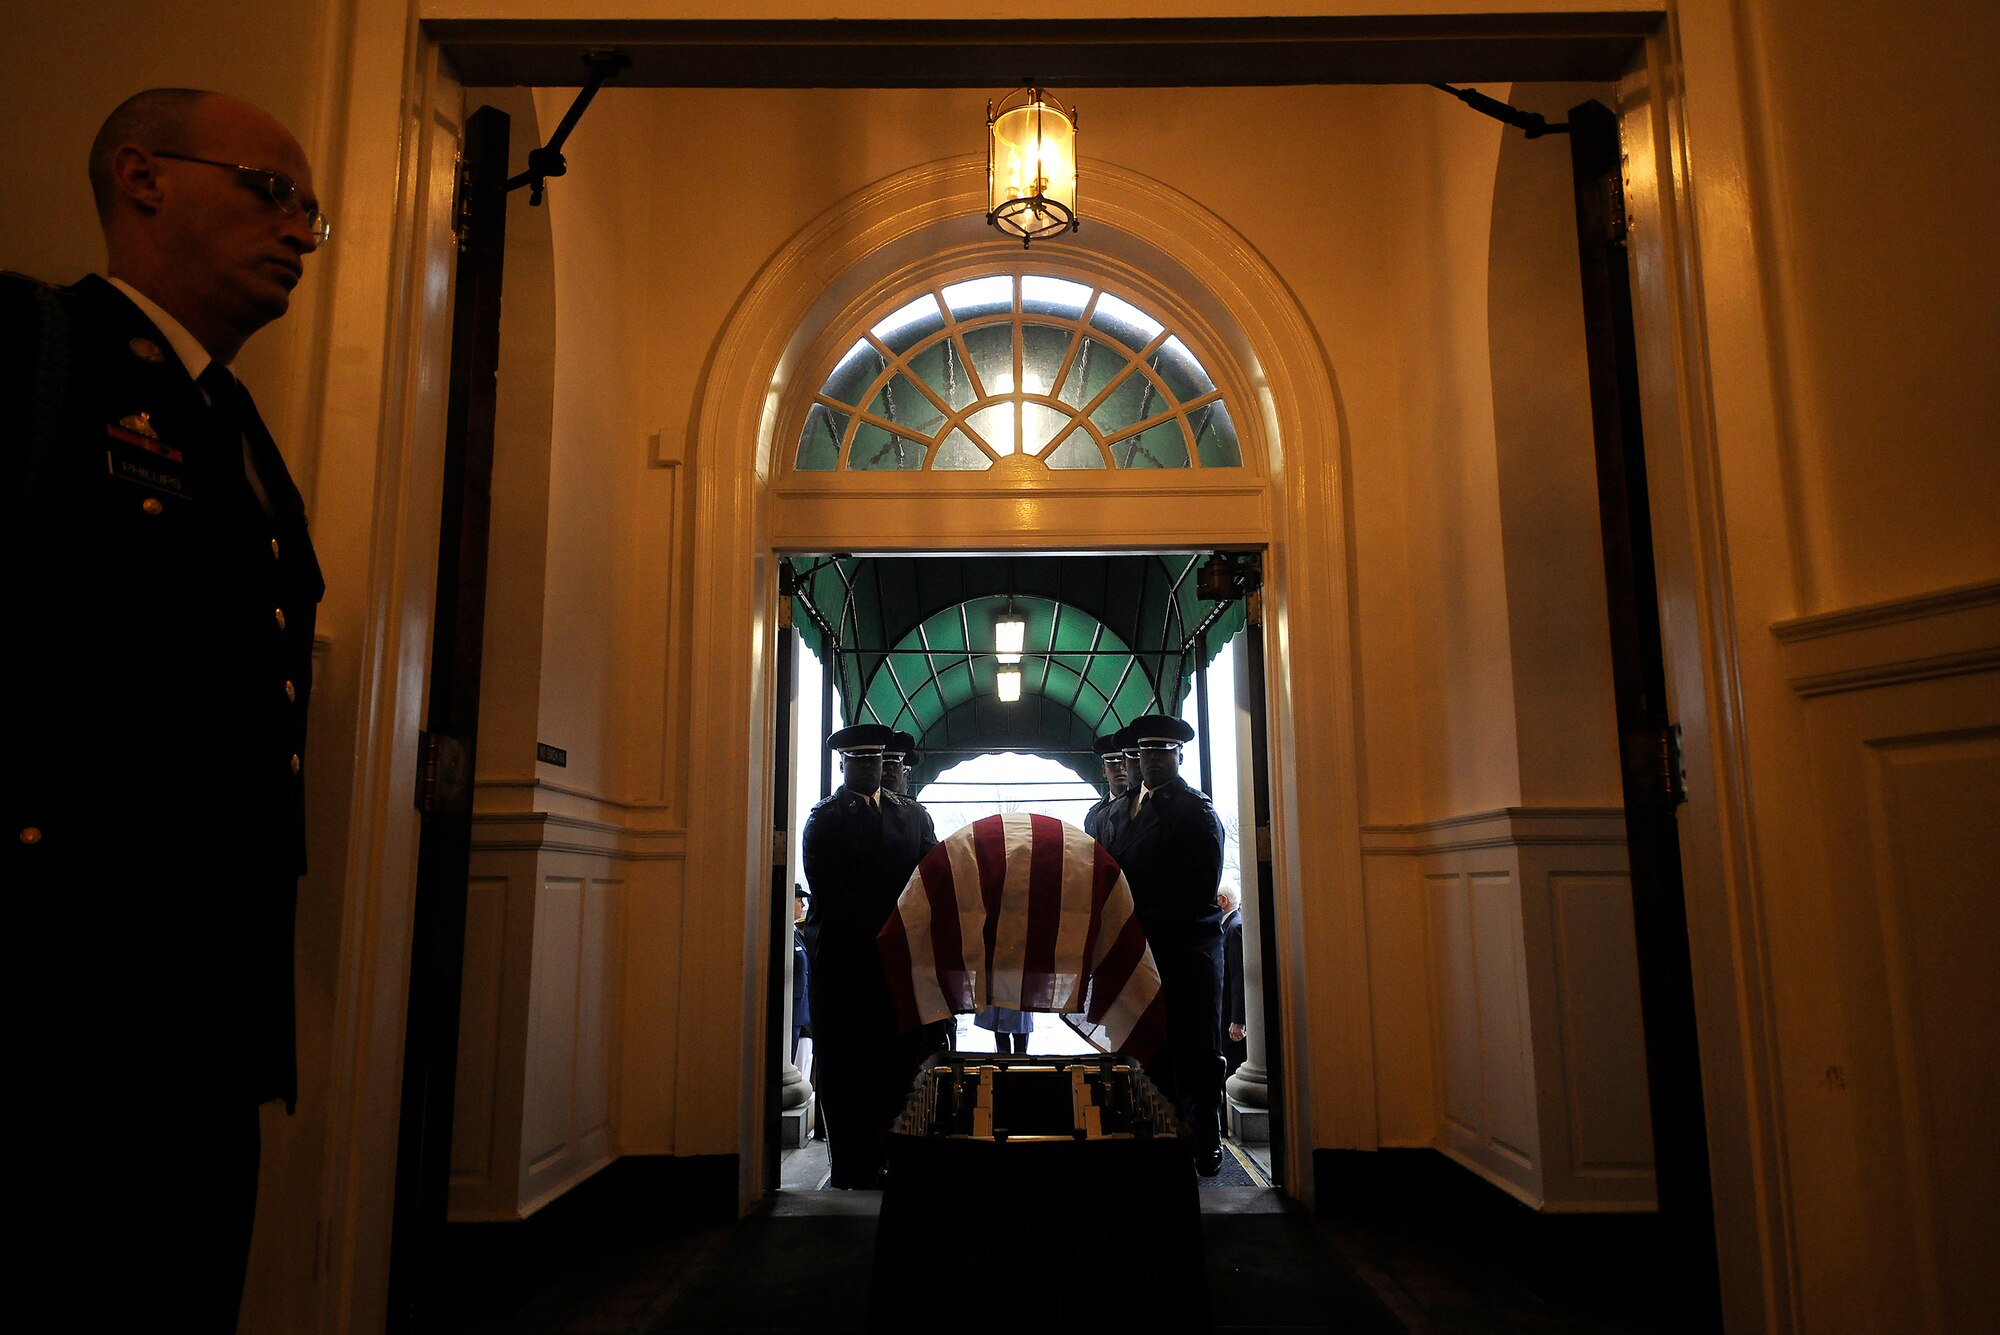 U.S. Air Force Honor Guard pall bearers carry the casket of Maj. Gen. Jeanne M. Holm into the Old Post Chapel on Joint Base Myer-Henderson Hall,  Va., near Arlington National Cemetery, March 29, 2010, before she was laid to her final rest in Arlington. General Holm, born in 1921, enlisted into the Women's Army Auxiliary Corps in 1942 and was commissioned a third officer -- a 2nd lieutenant equivalent -- in 1943.  (U.S. Air Force photo/Scott M. Ash)